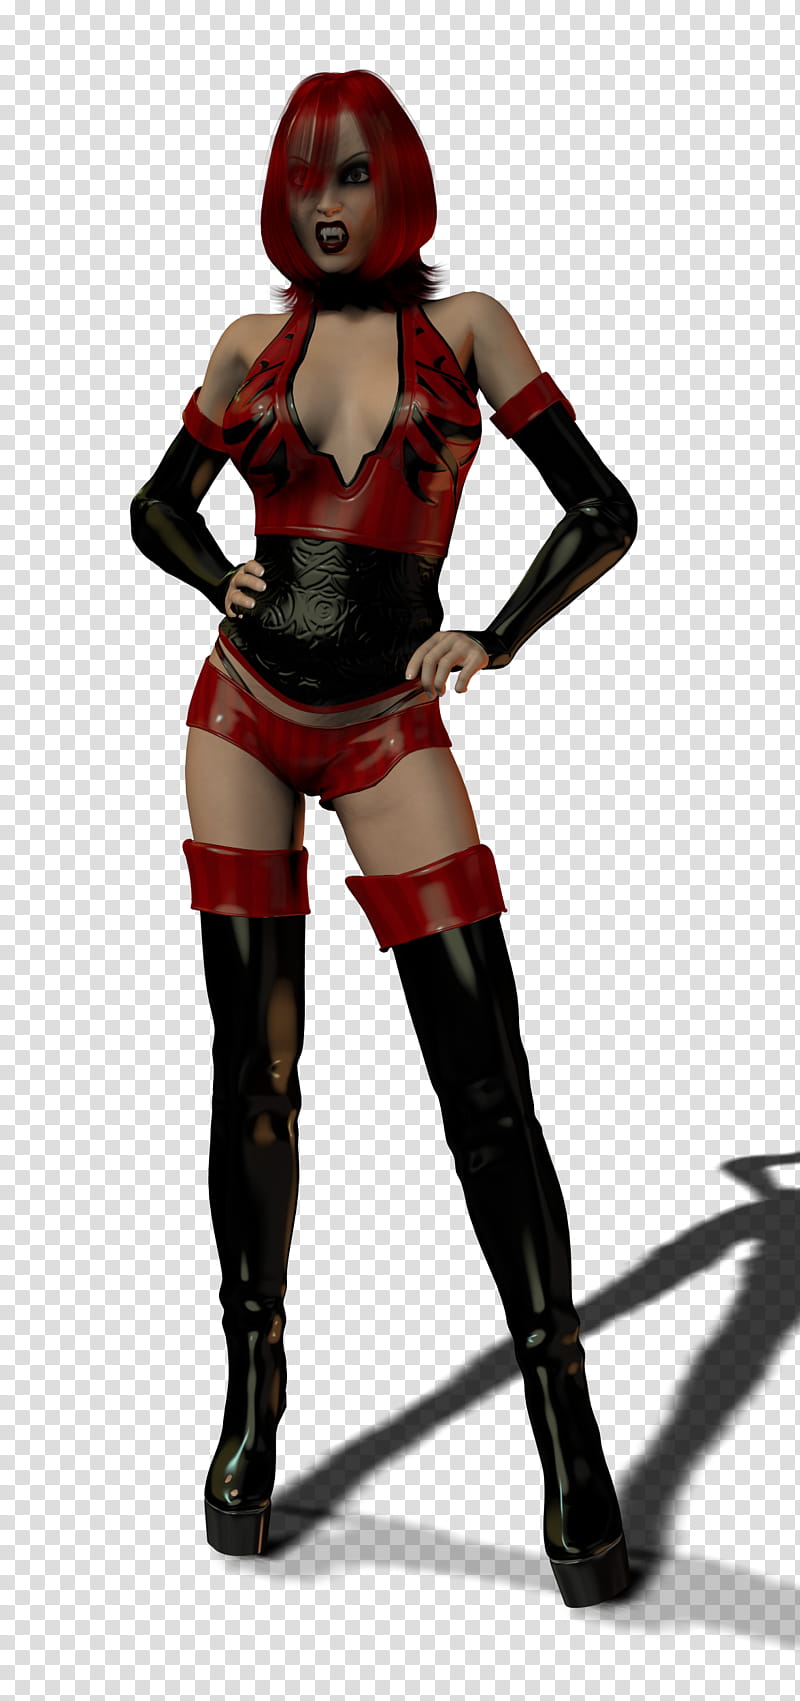 Vampire Girl, female character wearing red and black costume transparent background PNG clipart